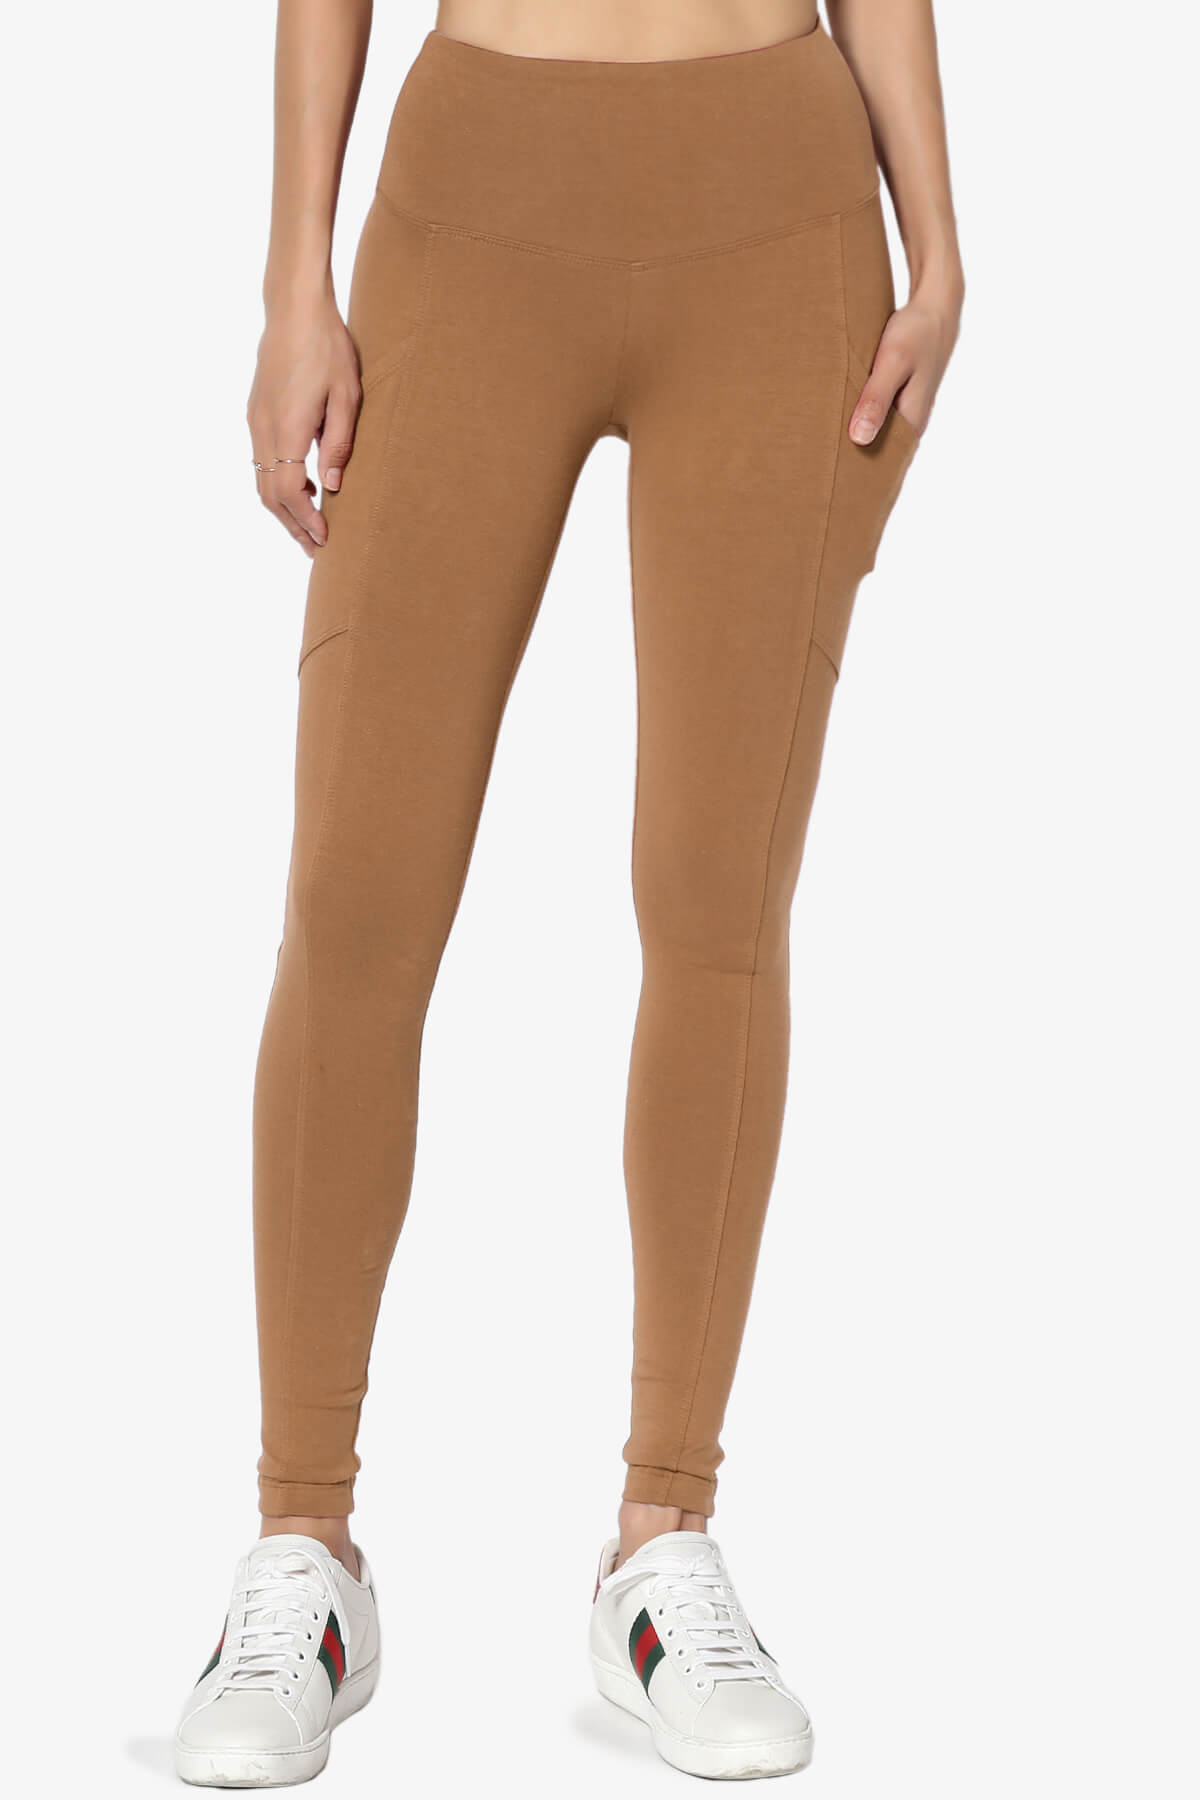 Ansley Luxe Cotton Leggings with Pockets DEEP CAMEL_3